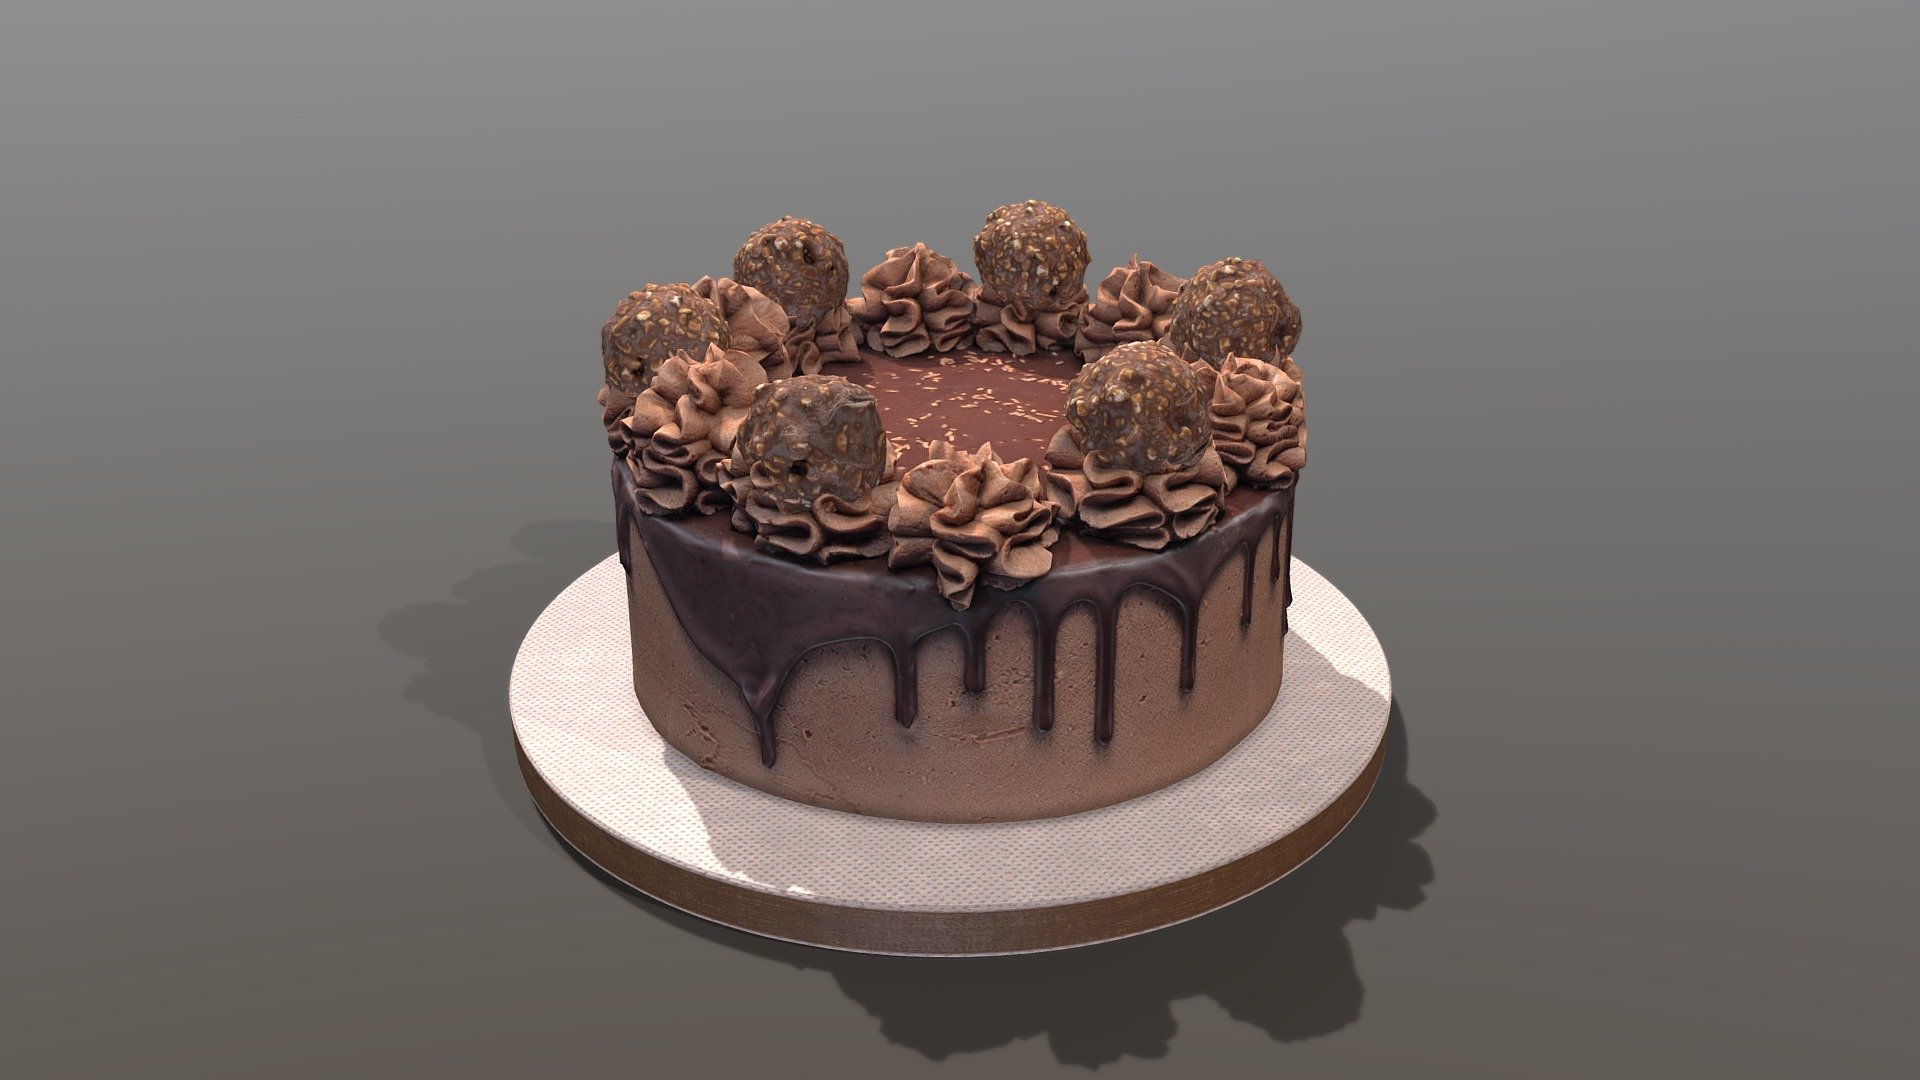 This premium Chocolate Ferrero Rocher Drip Gateau Cake model was created using photogrammetry which is made by CAKESBURG Premium Cake Shop in the UK. You can purchase real cake from this link: https://cakesburg.co.uk/products/chocolate-heaven-cake?_pos=1&amp;_sid=25d1b3fb8&amp;_ss=r

Cake Texture 40964096px PBR photoscan-based materials (Base Color, Normal, Roughness, Specular)
Ferrero Rocher Balls 20482048px PBR photoscan-based materials (Base Color, Normal, Roughness, Specular)
Cake Drum 4096*4096px PBR  (Base Color, Normal, Roughness, Specular) - Ferrero Rocher Drip Gateau - Buy Royalty Free 3D model by Cakesburg Premium 3D Cake Shop (@Viscom_Cakesburg) 3d model